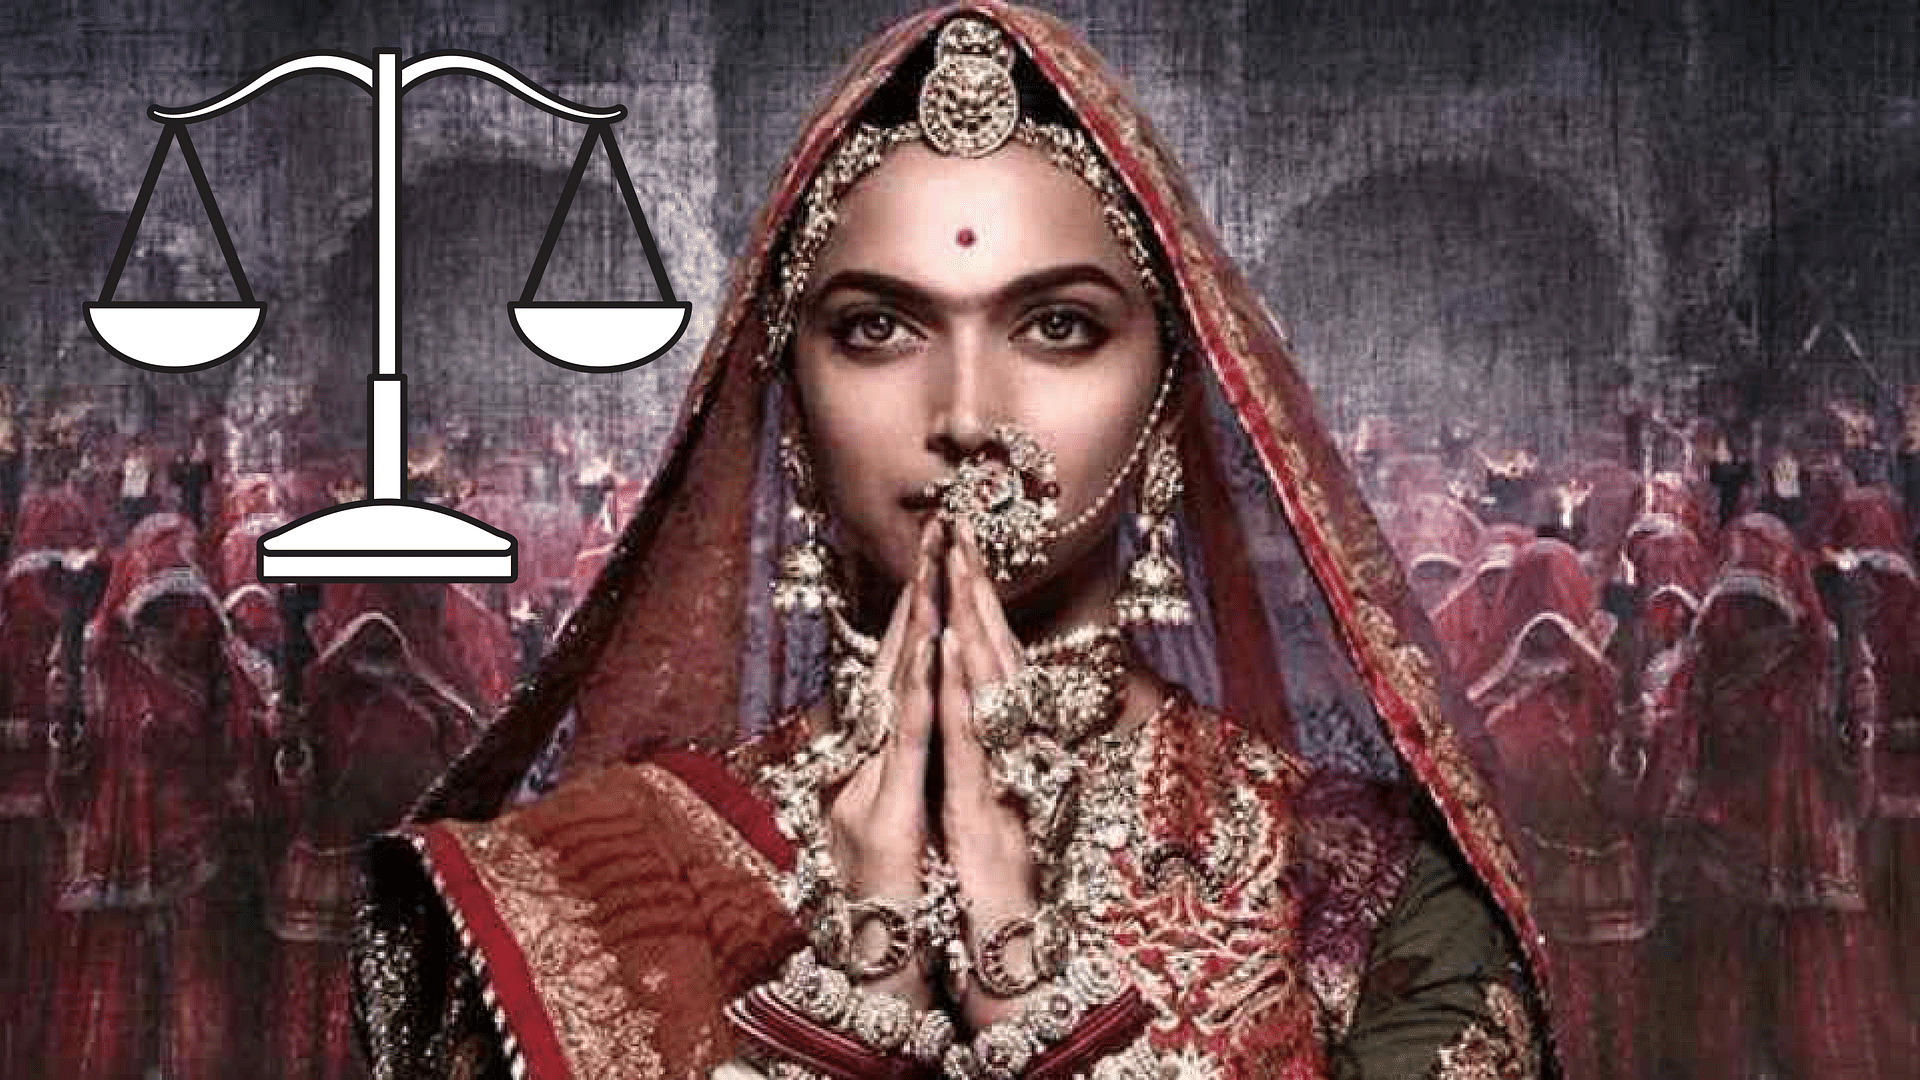 According to CNN-News 18, lawyer ML Sharma filed another petition against ‘Padmaavat’ a day before its official release.